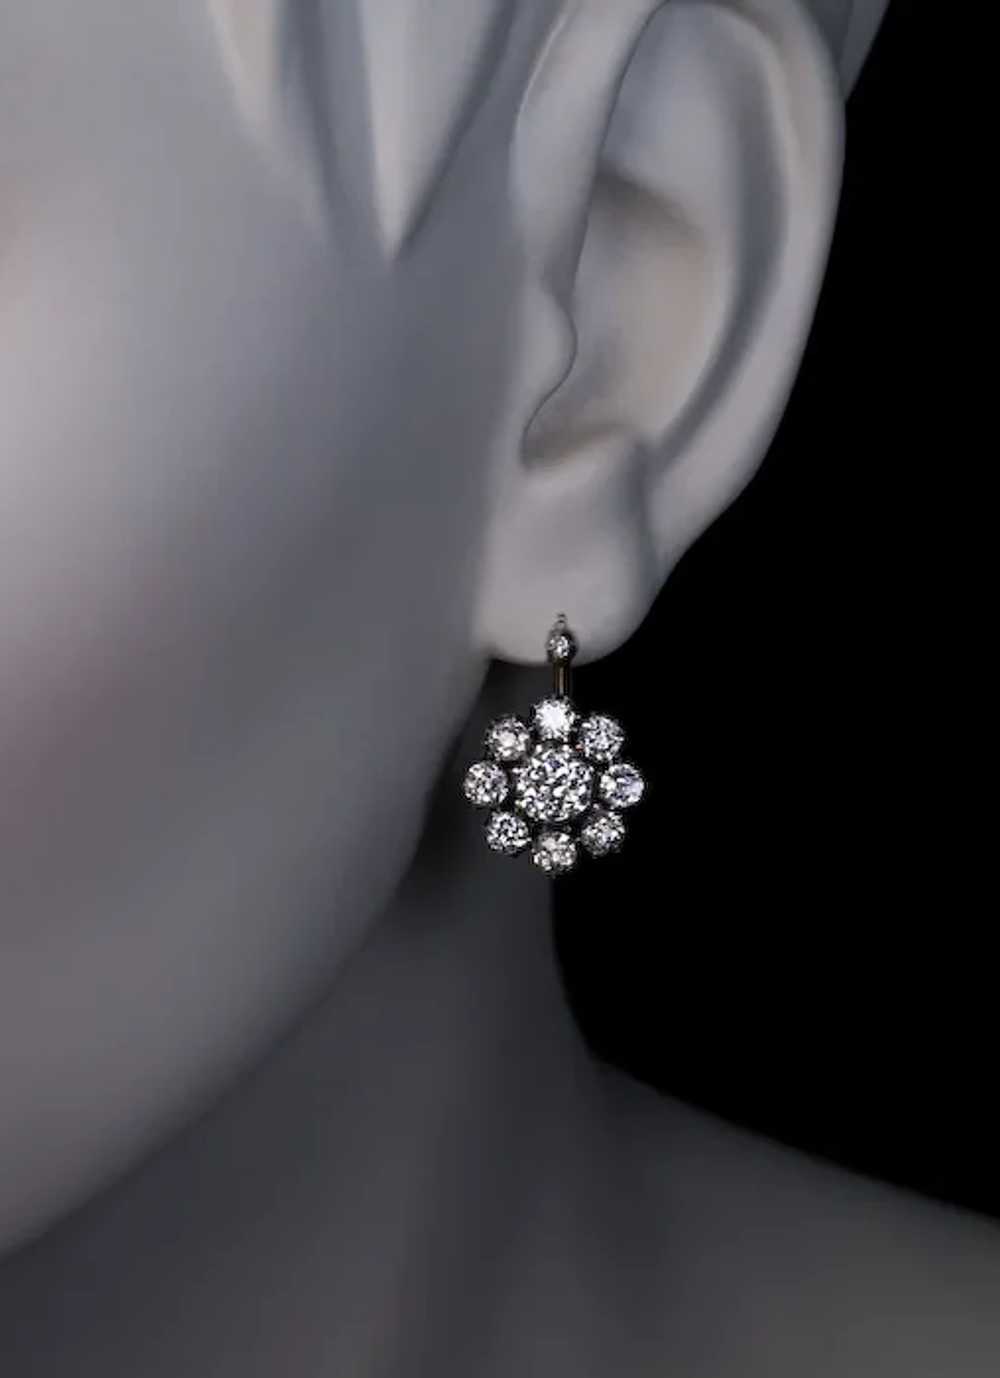 Antique Russian 4.28 Ct Diamond Cluster Earrings - image 3